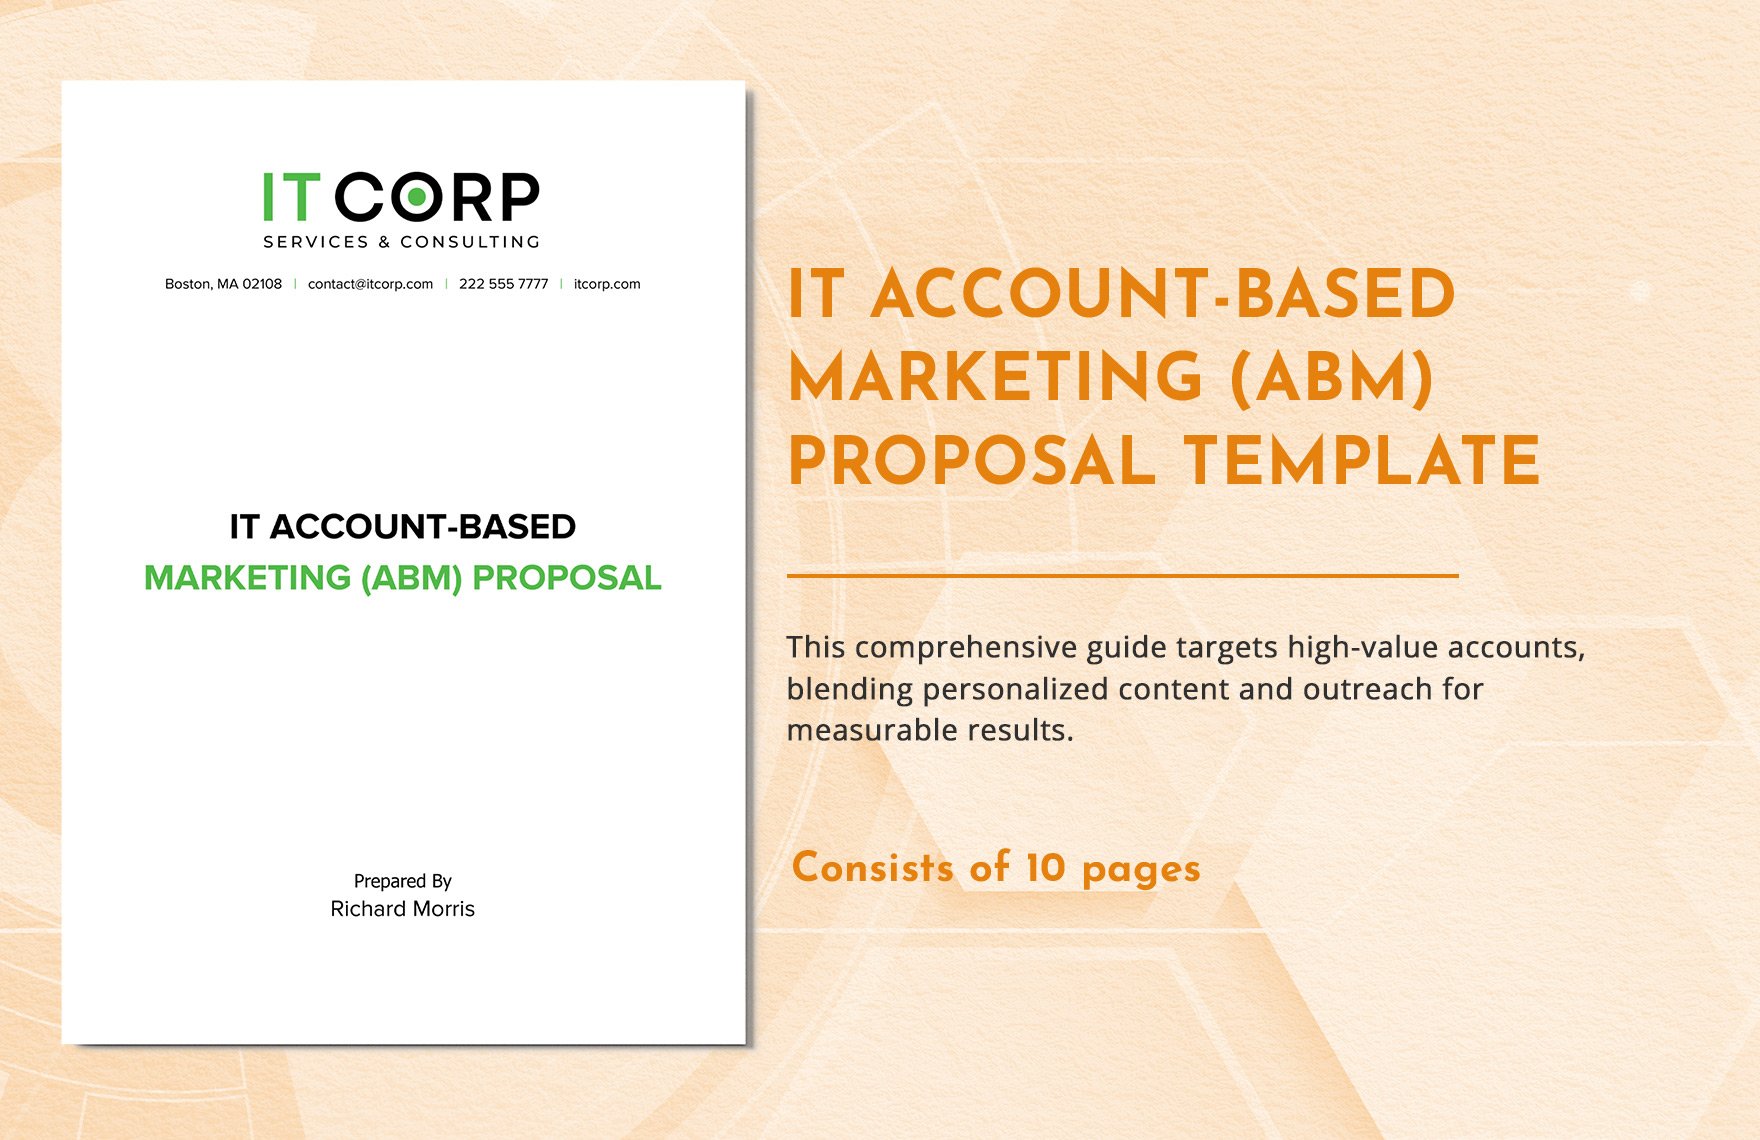 IT Account-Based Marketing (ABM) Proposal Template